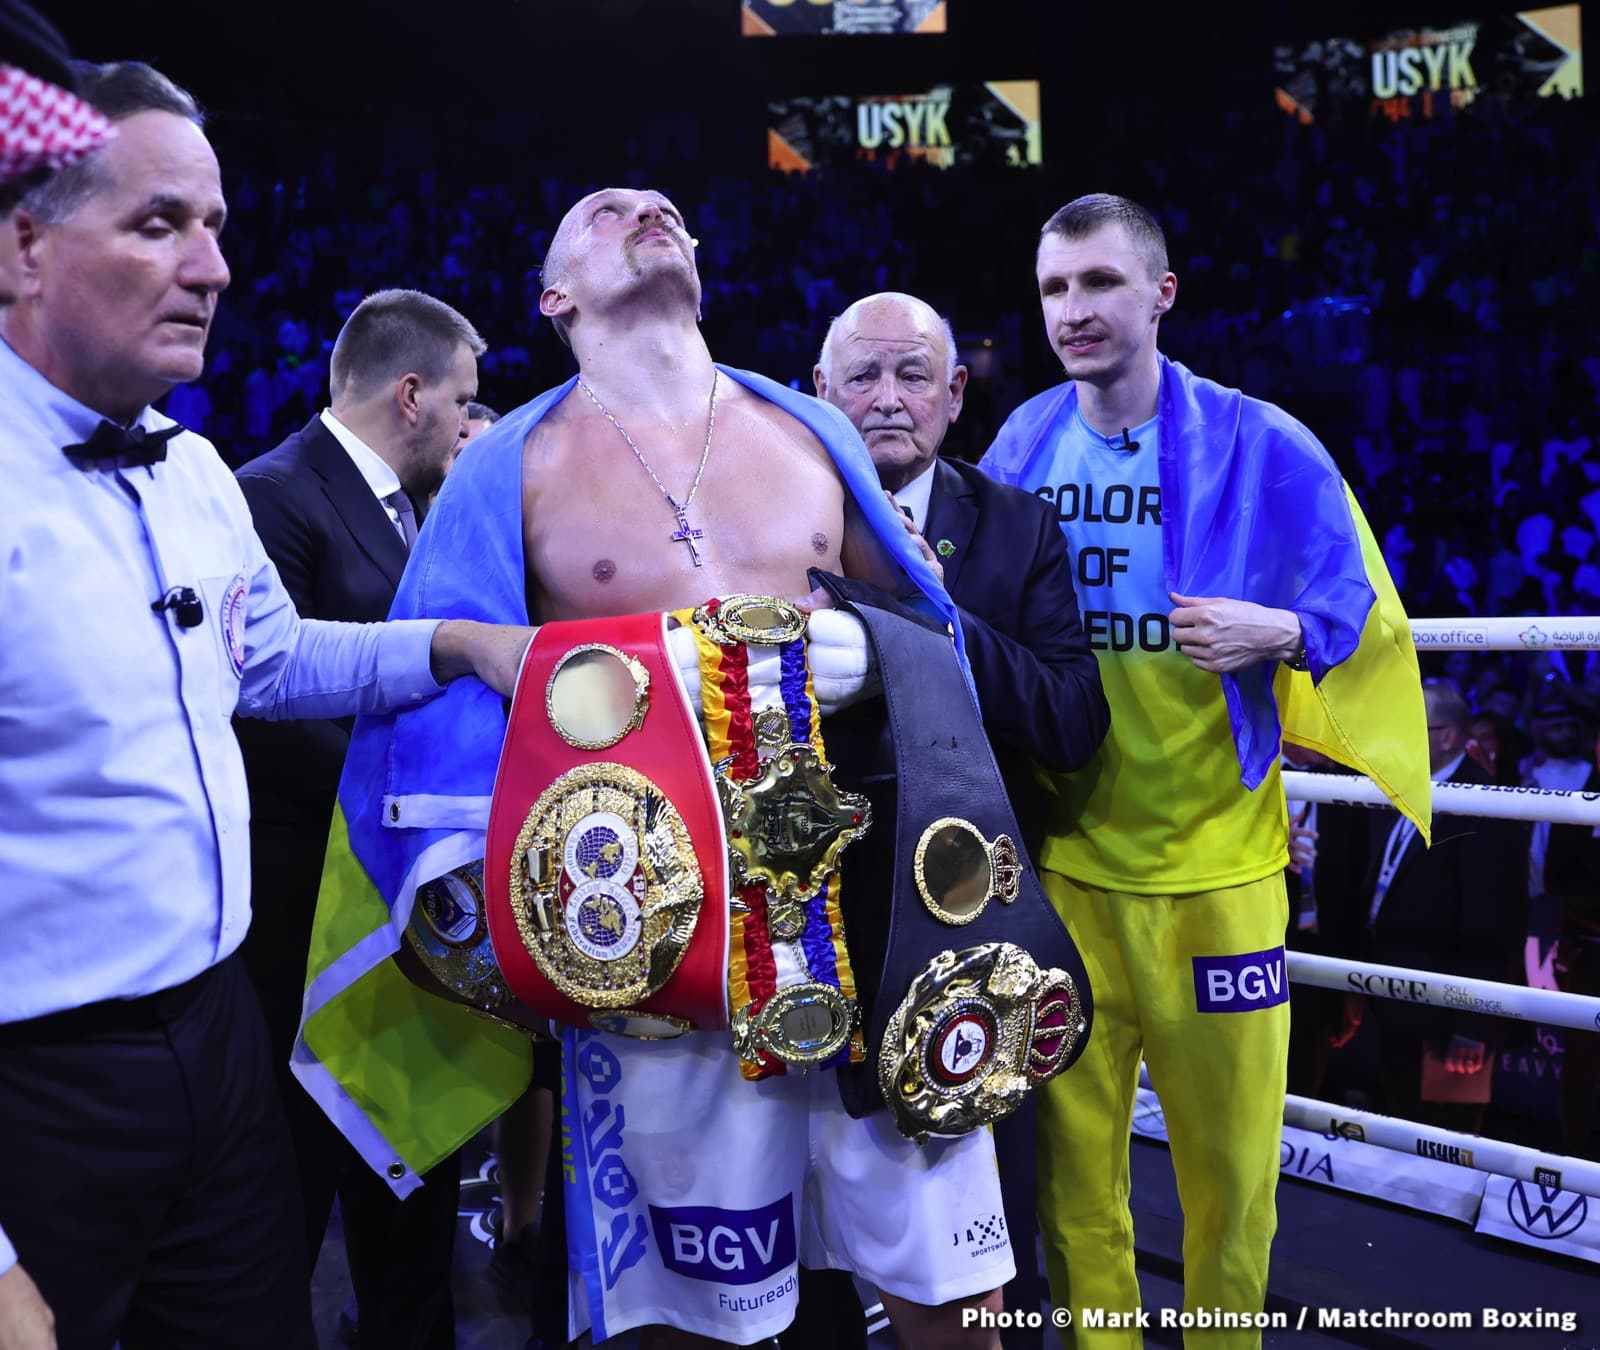 Steve Cunningham picks Usyk to defeat Tyson Fury by decision or DQ